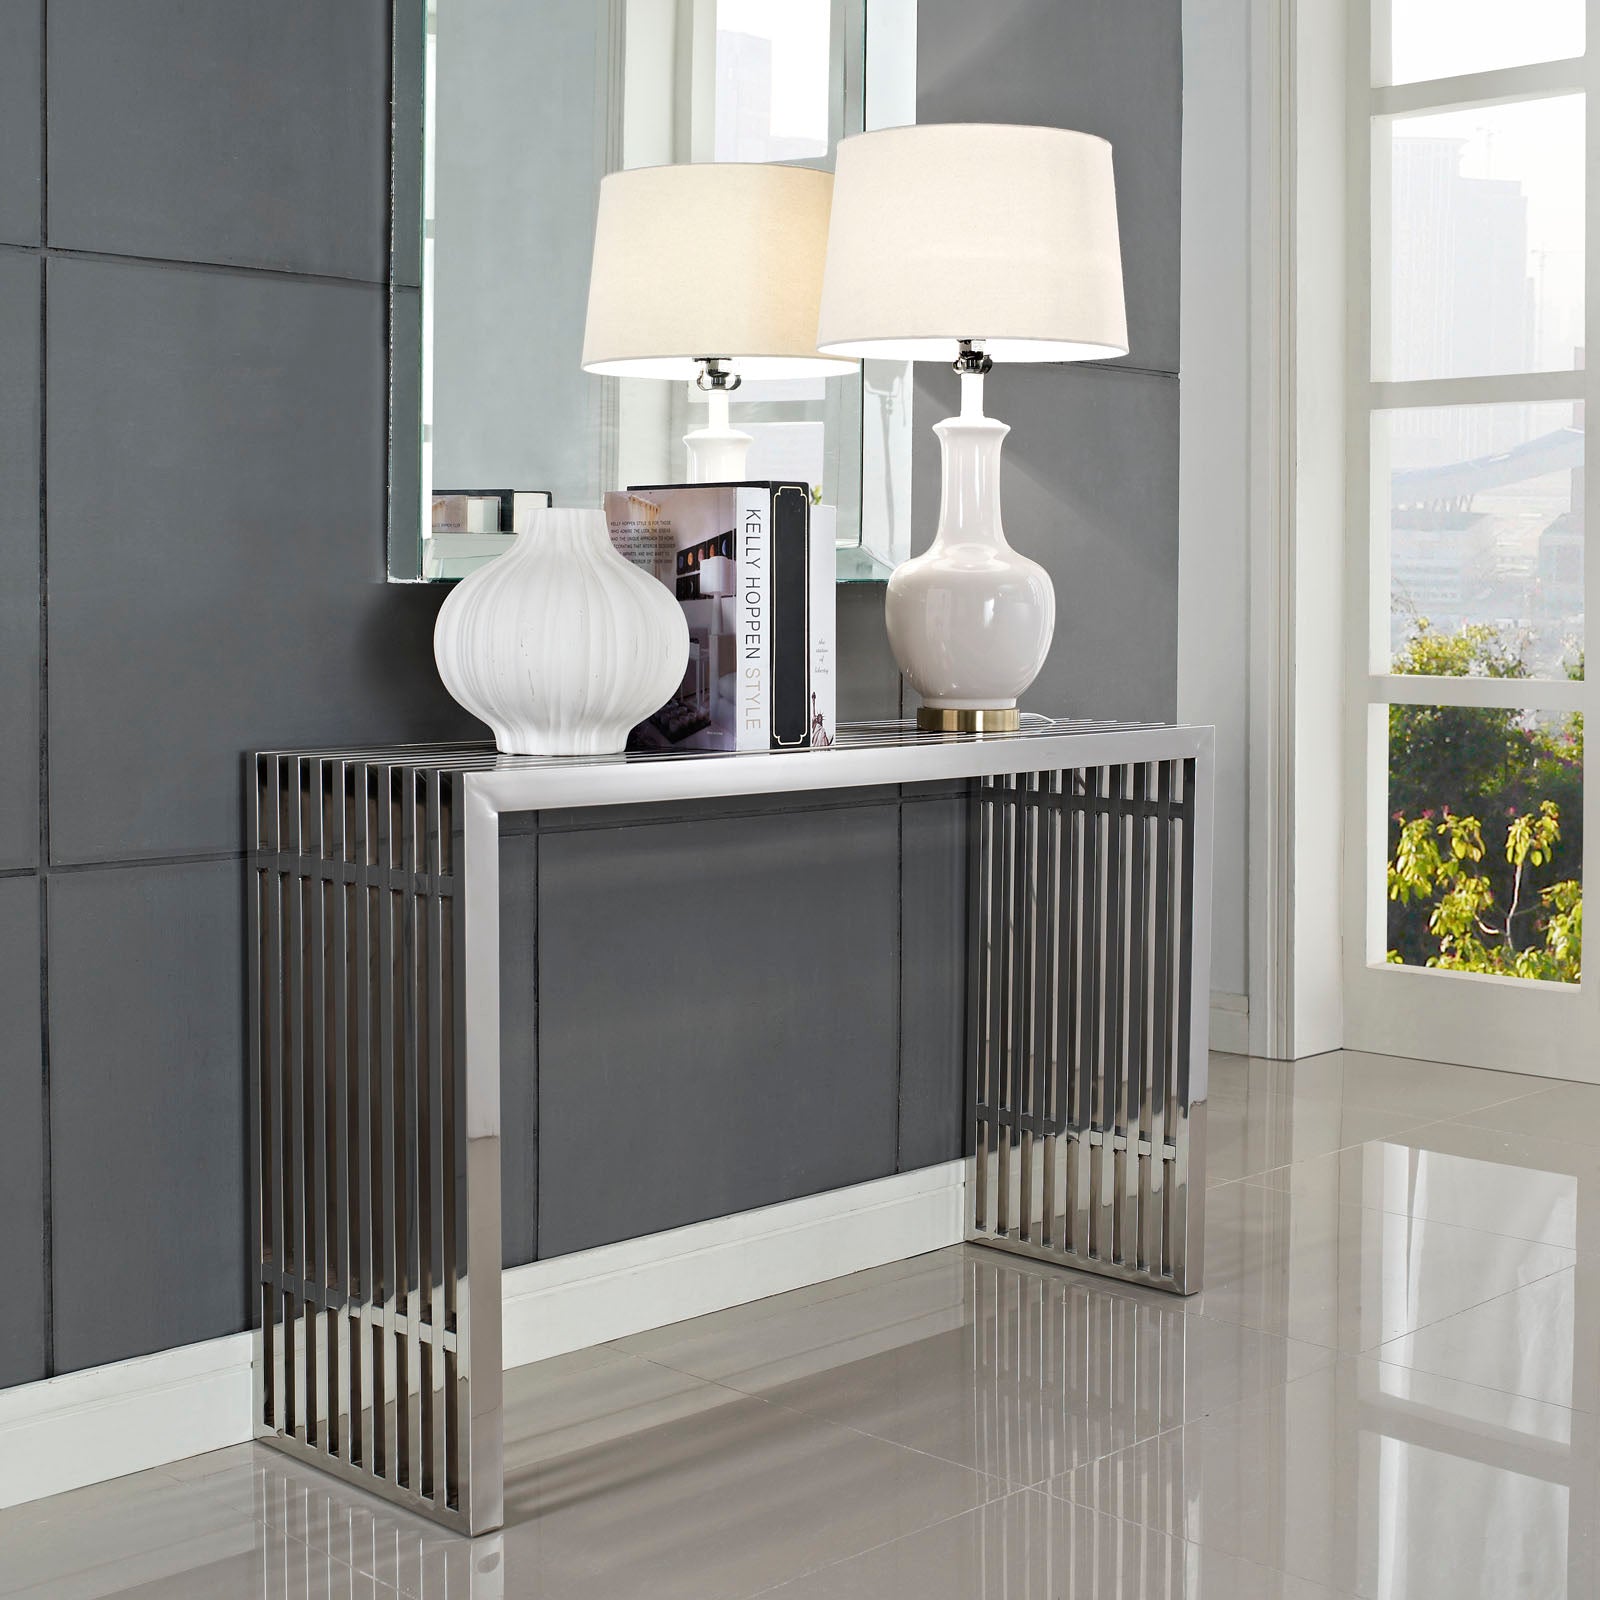 Gridiron Console Table - East Shore Modern Home Furnishings